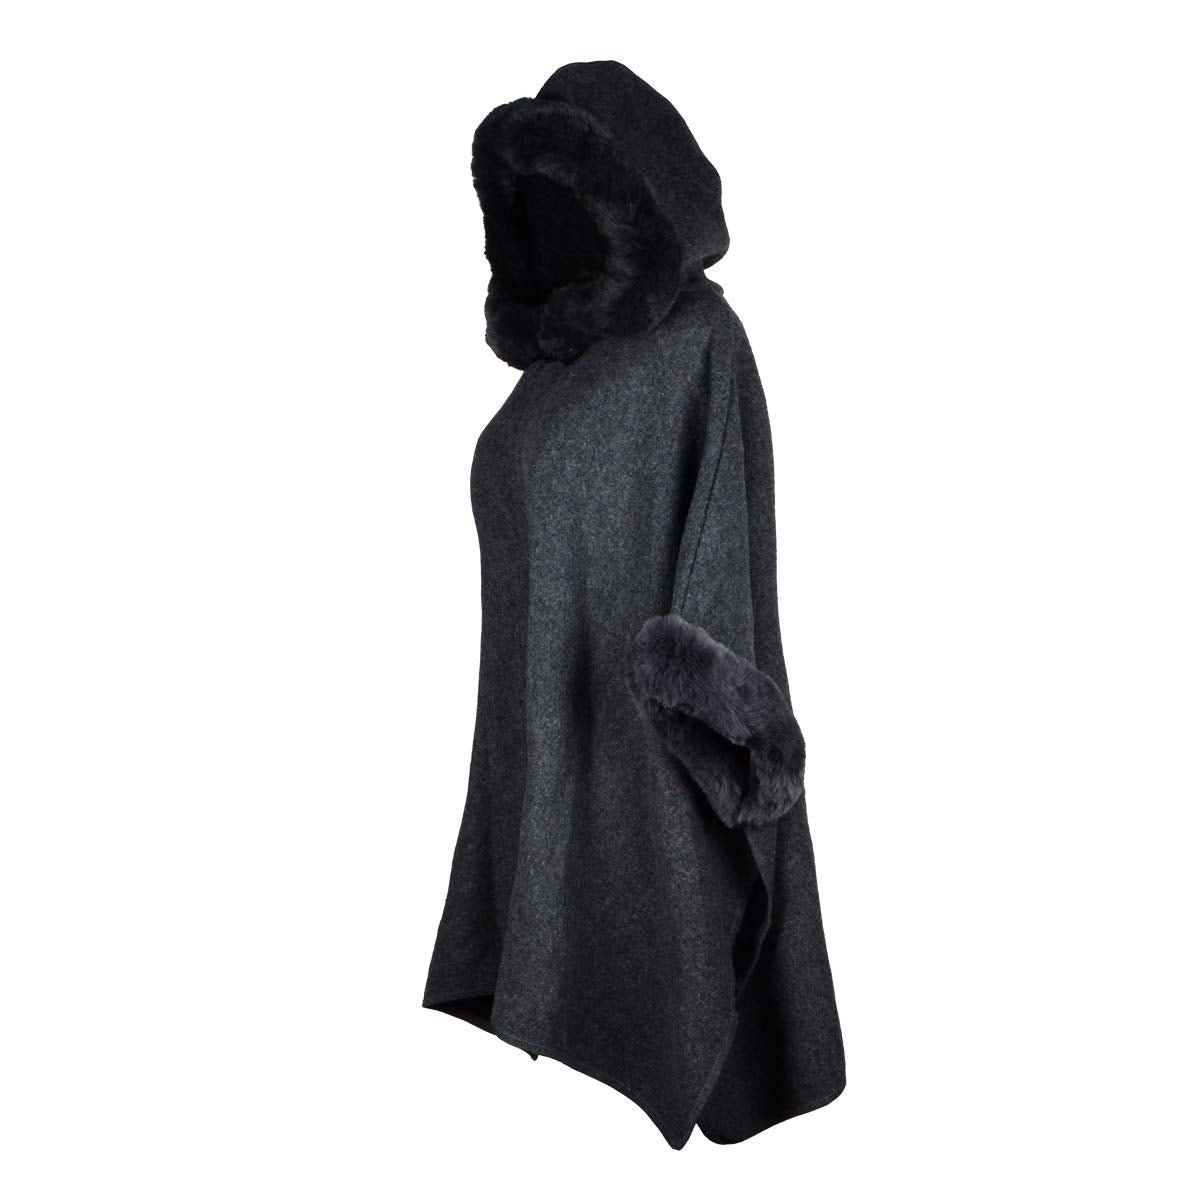 Black Hooded Viking Cape with Faux Fur